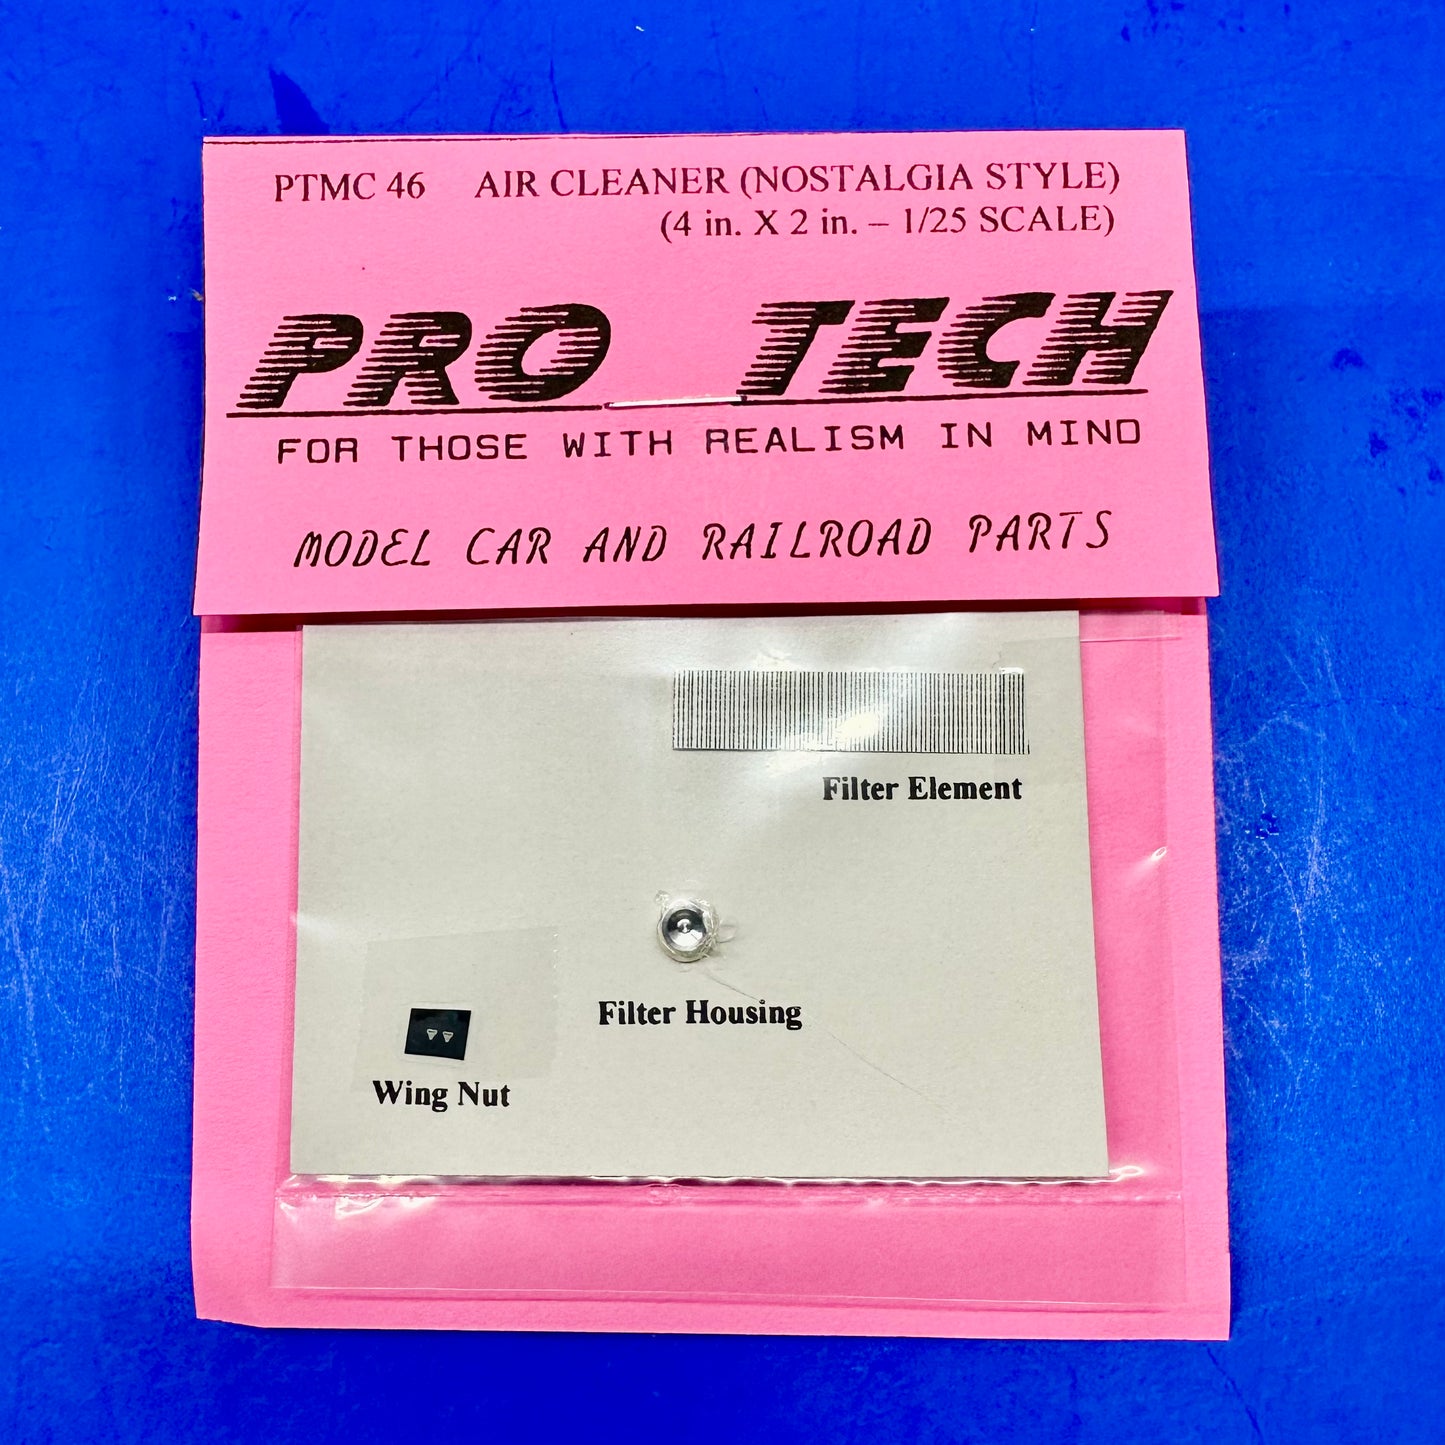 PTMC46 Air Cleaner Nostalgia Style 1/25 by Pro Tech